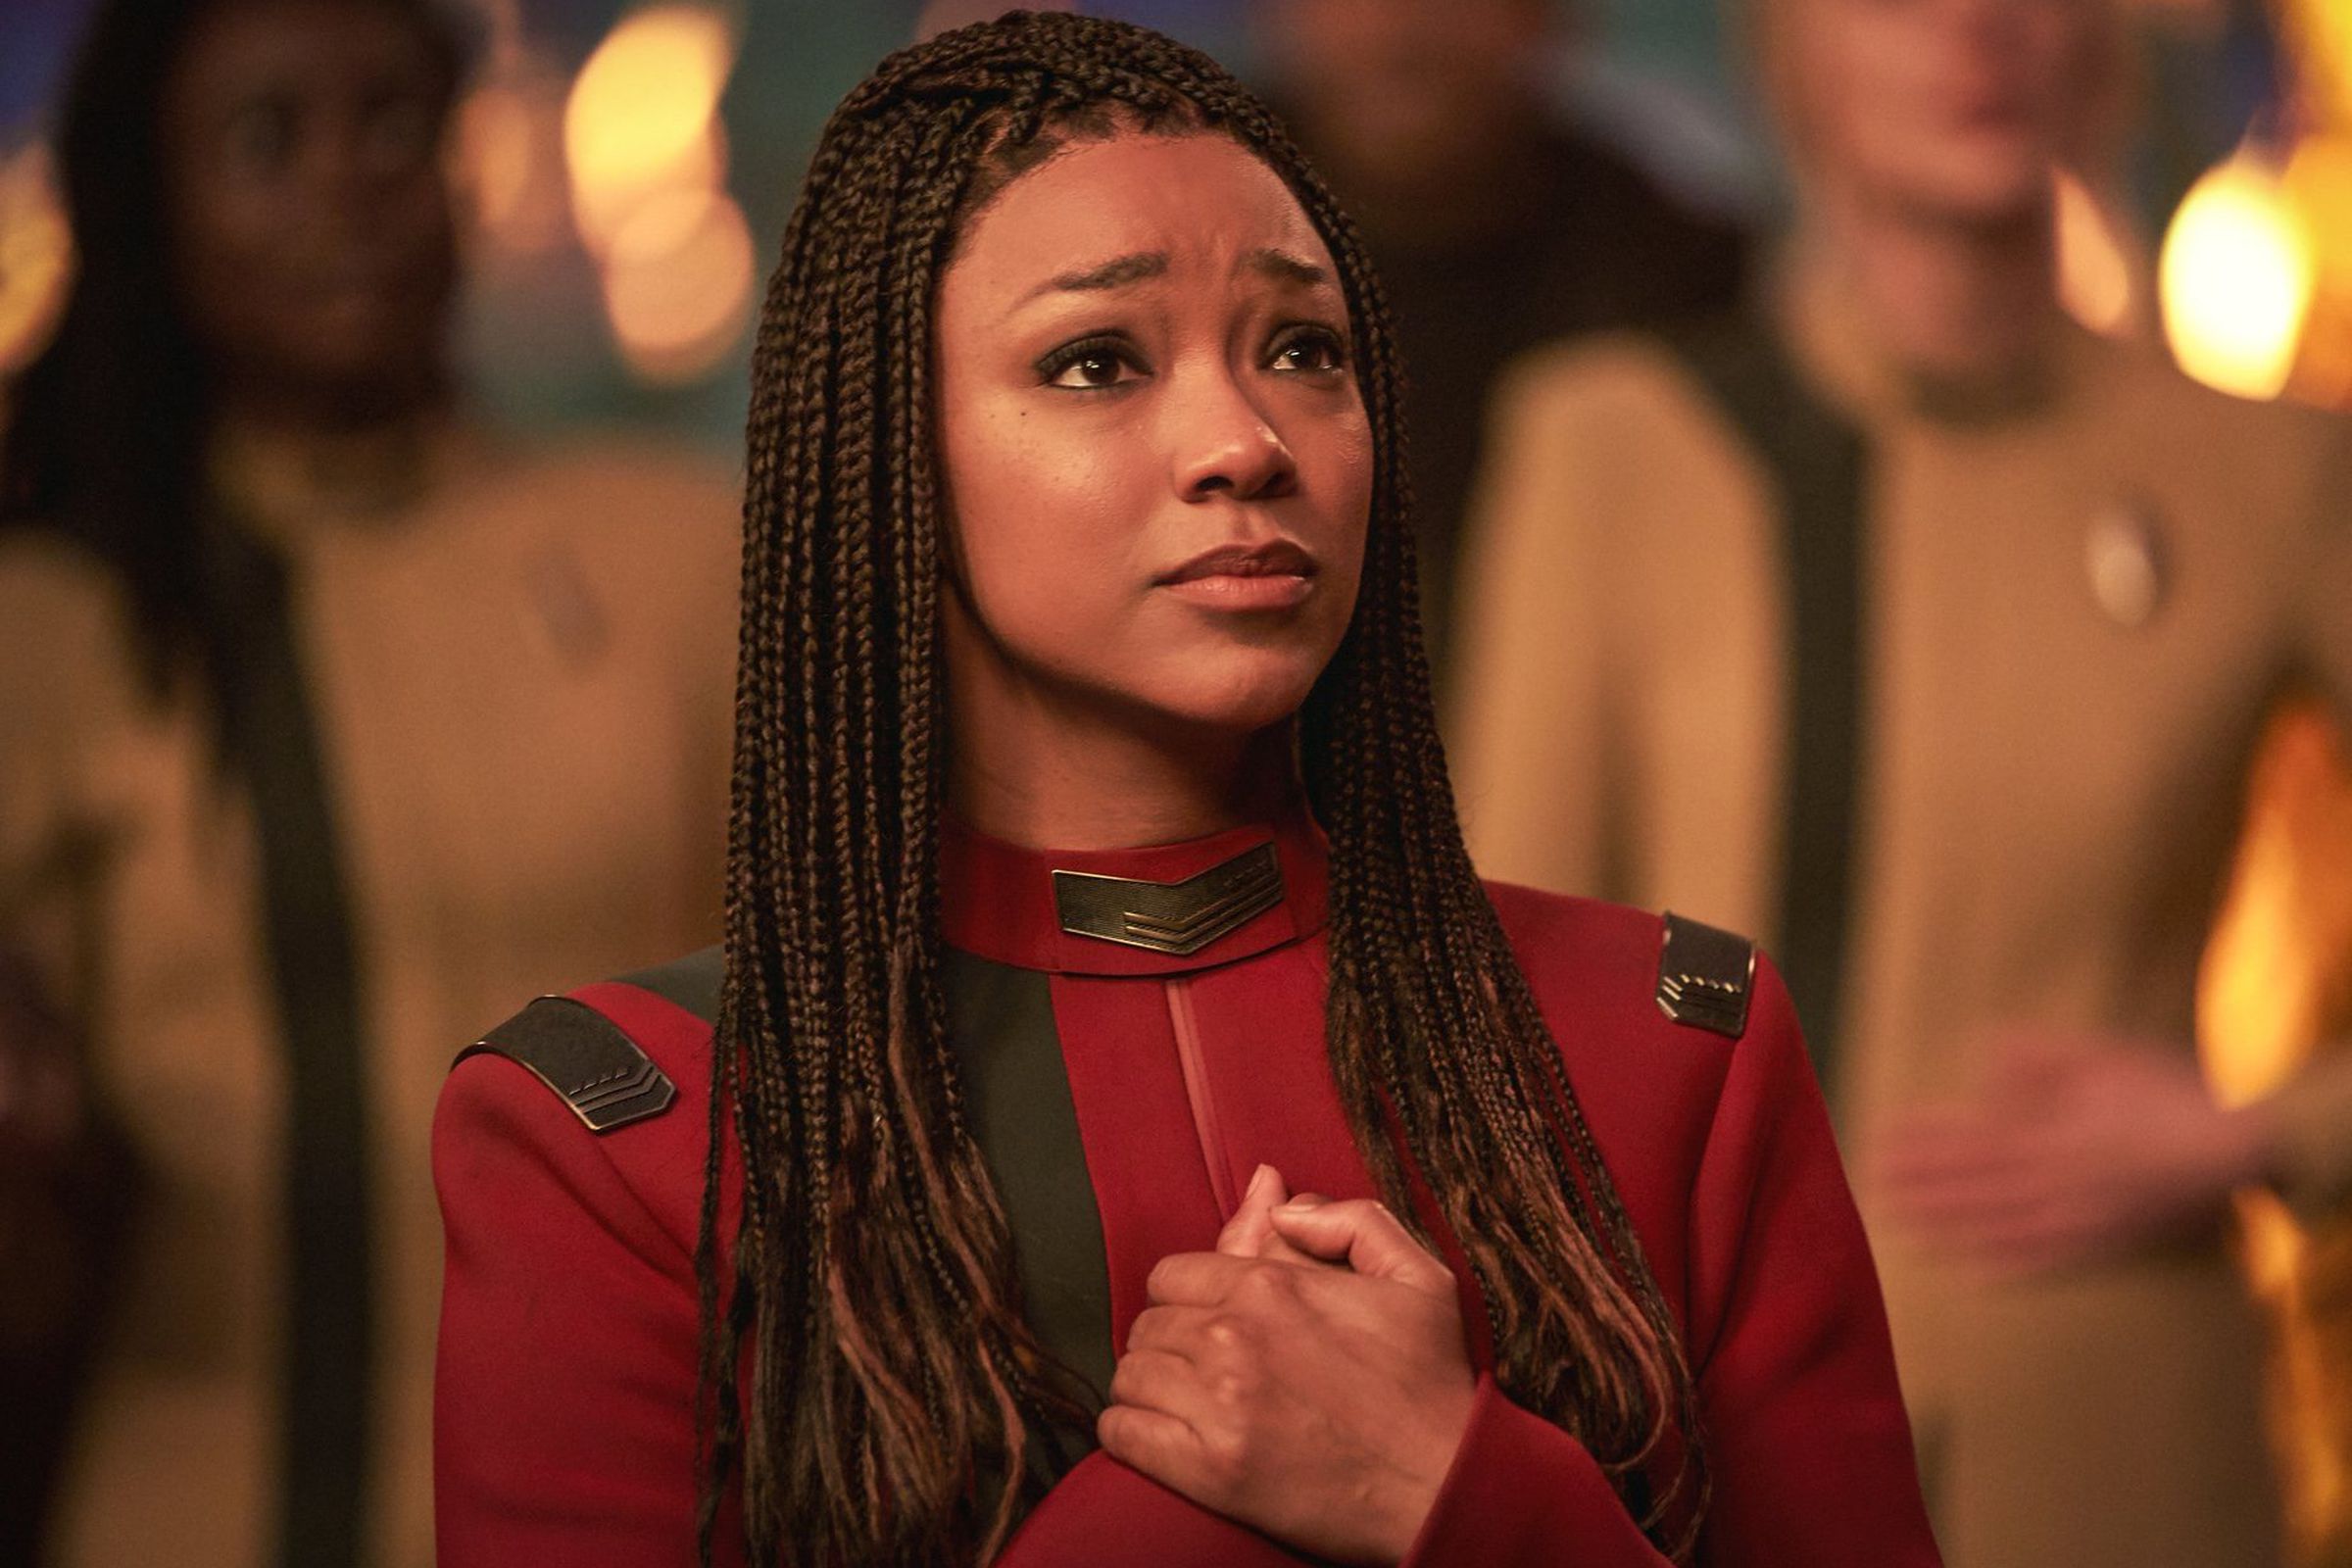 A Black woman with long braids wearing a red uniform and clasping her hands together in front of her chest.